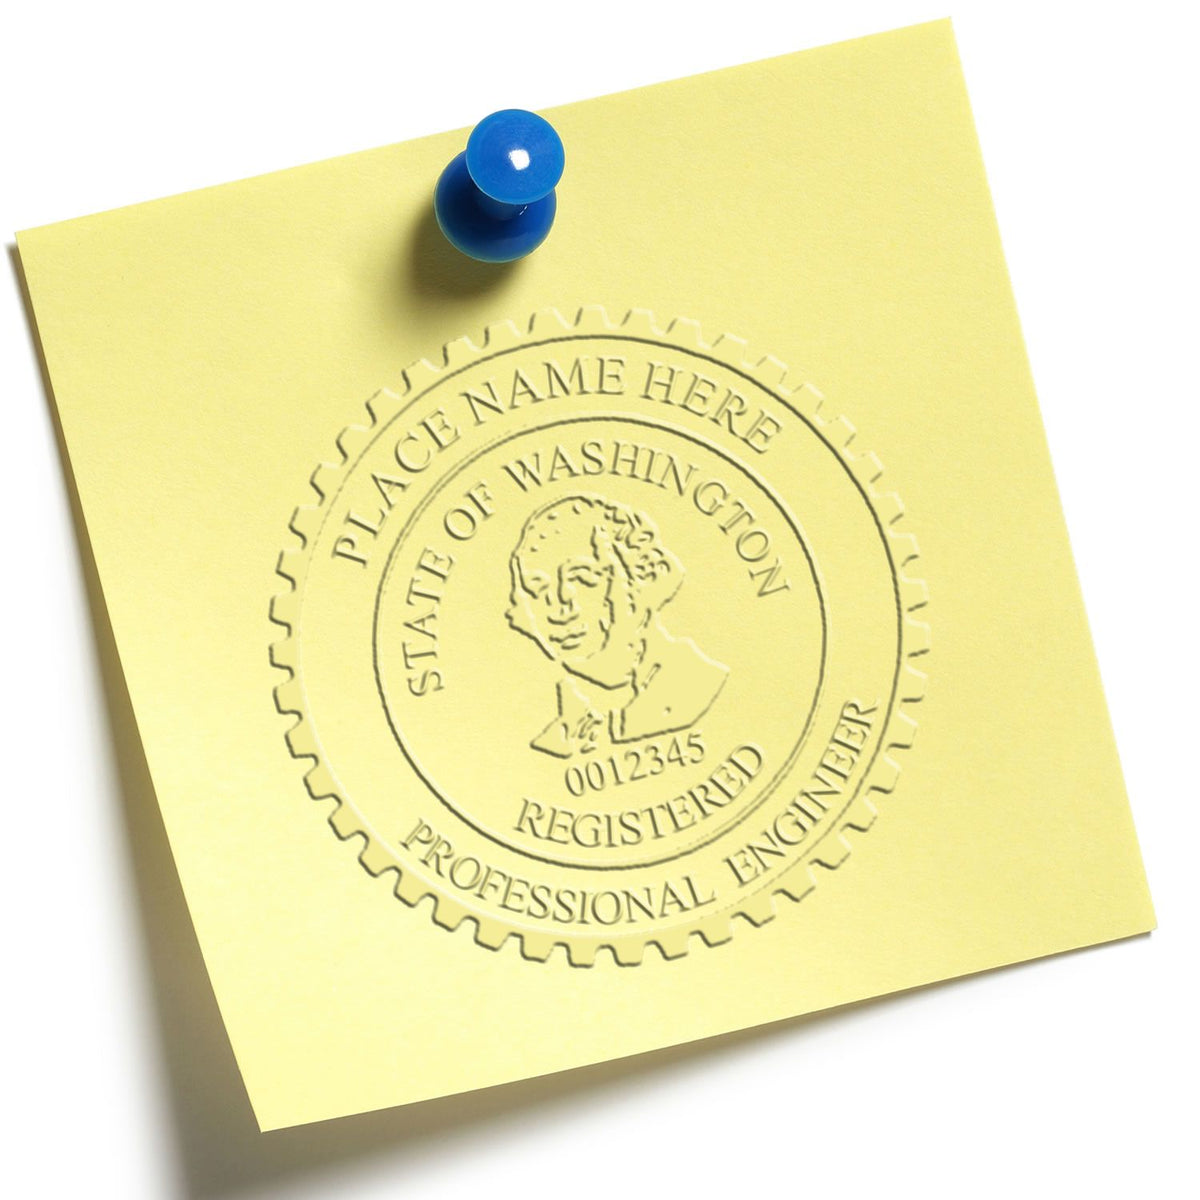 This paper is stamped with a sample imprint of the Soft Washington Professional Engineer Seal, signifying its quality and reliability.